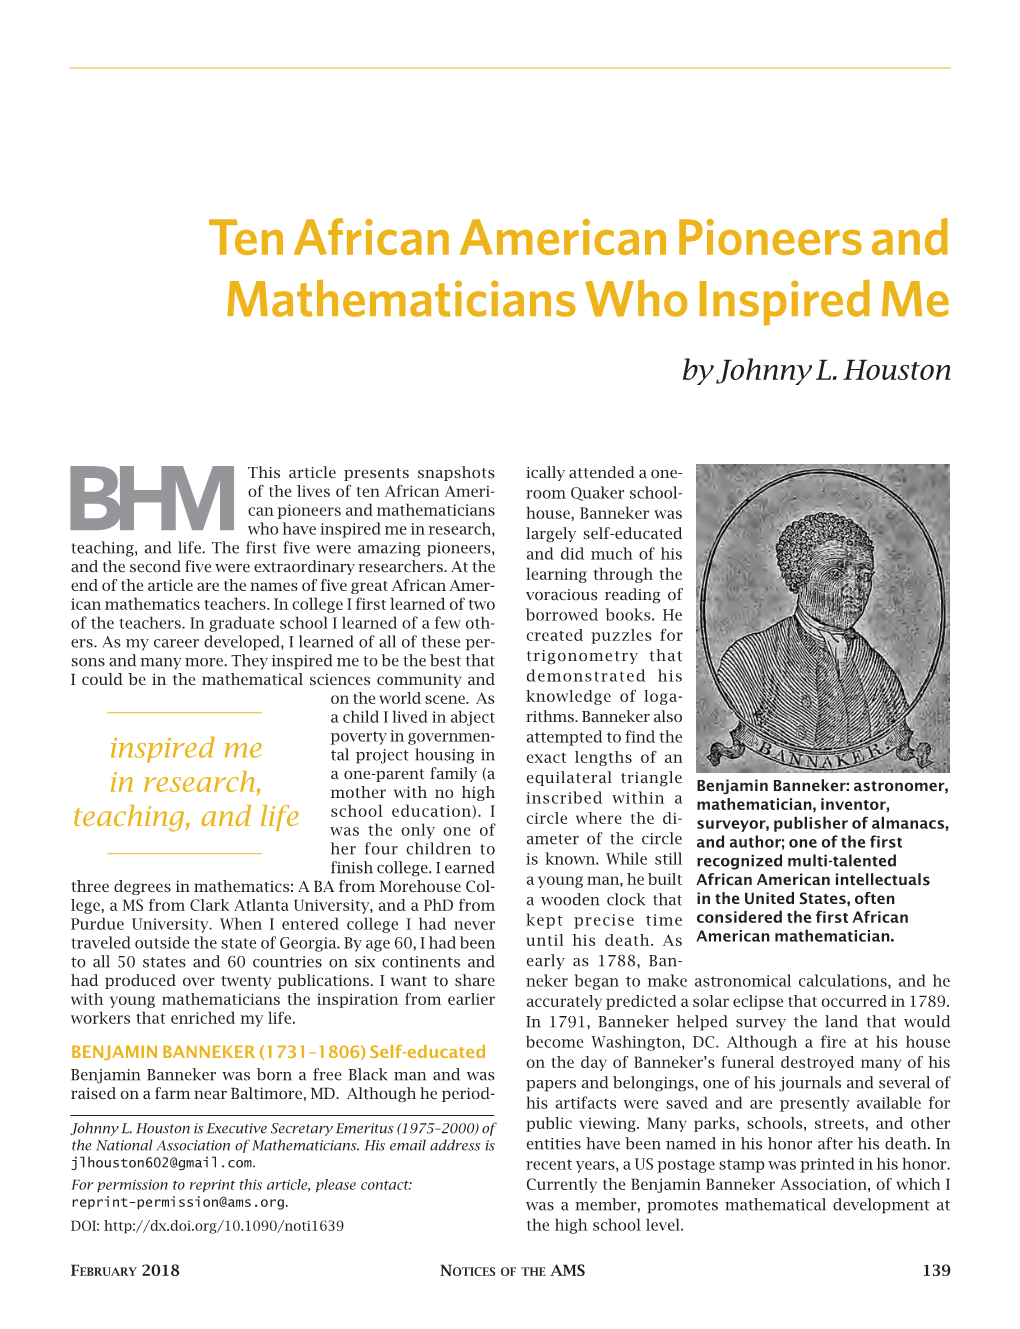 Ten African American Pioneers and Mathematicians Who Inspired Me